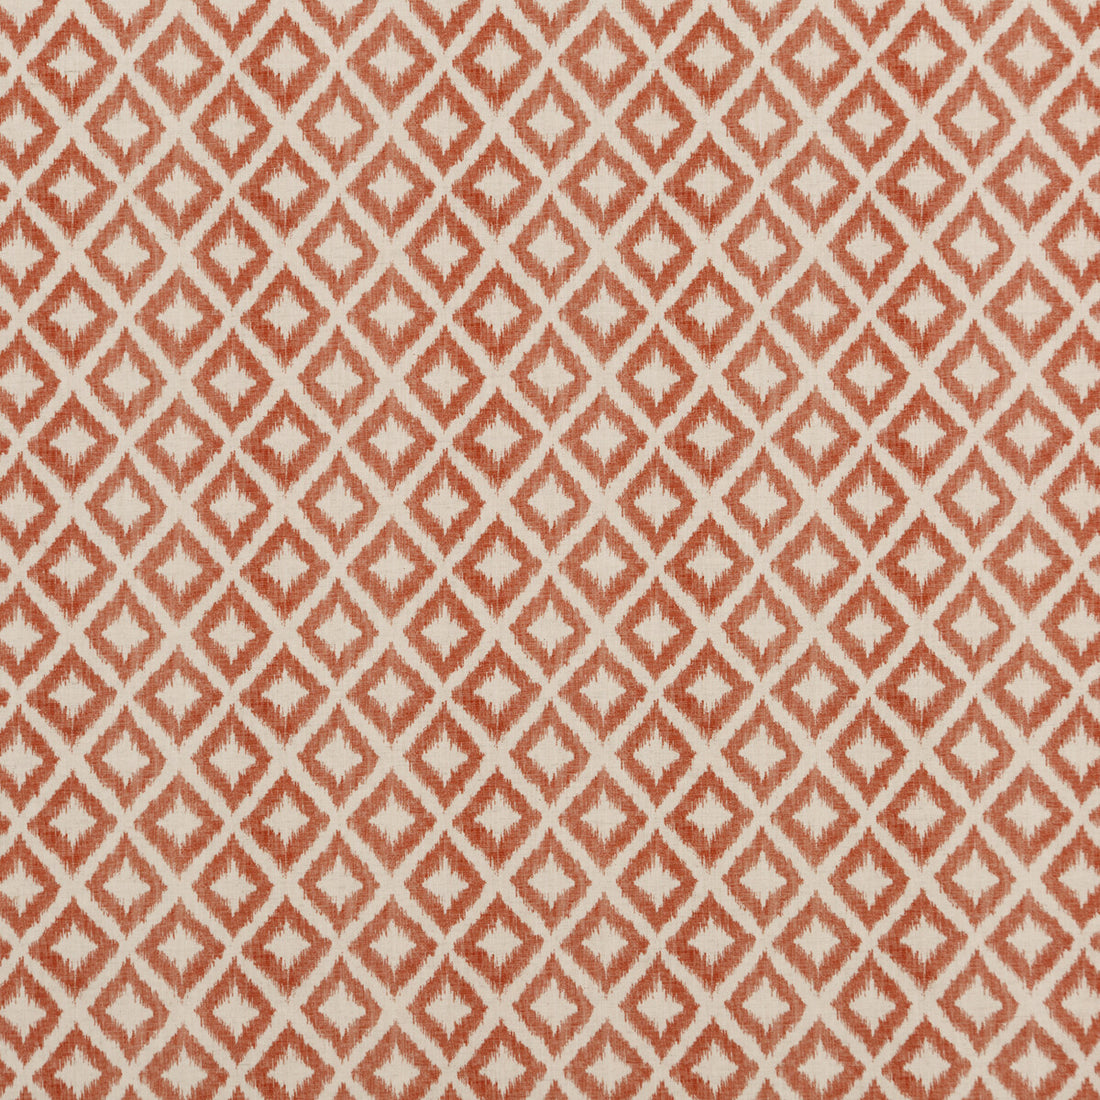 Salsa Diamond fabric in spice color - pattern PP50431.4.0 - by Baker Lifestyle in the Carnival collection